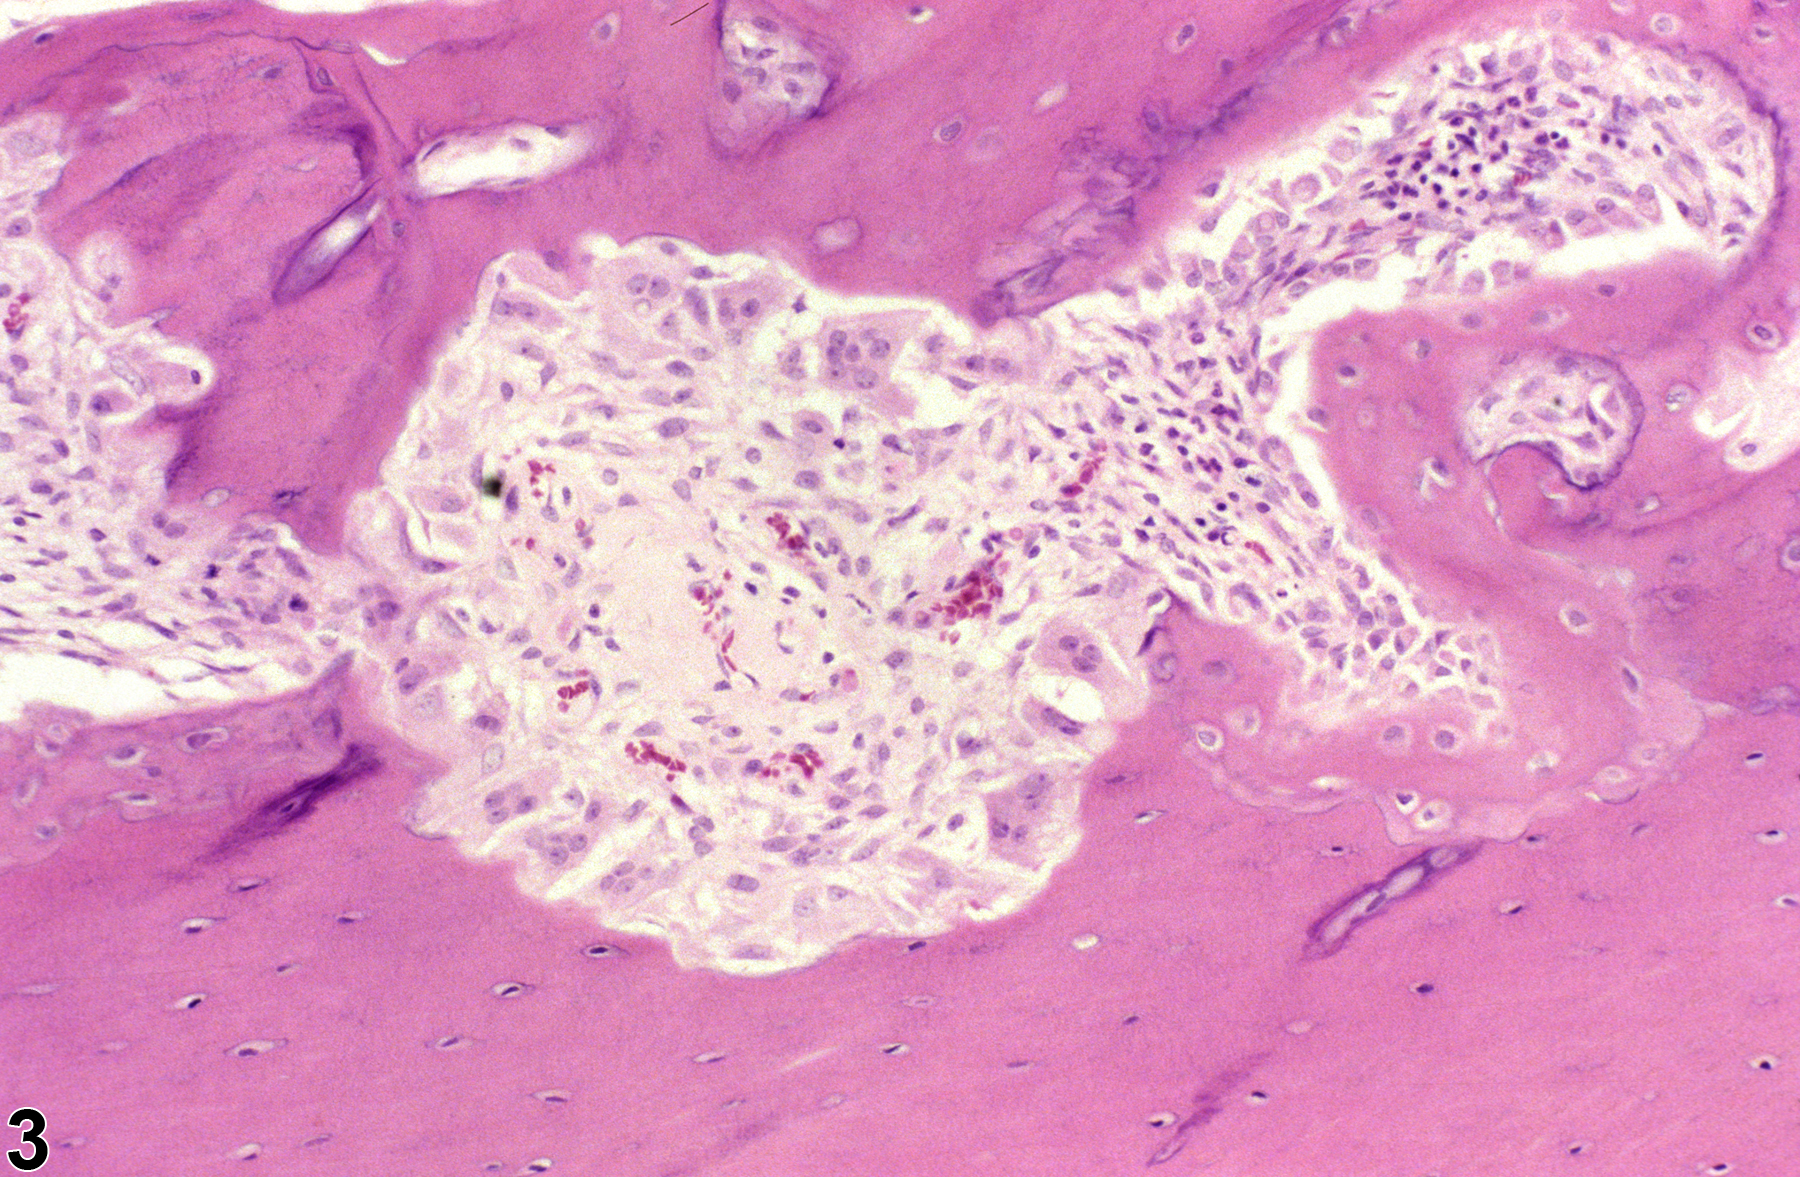 Image of fibrous osteodystrophy in the bone from a male F344/N rat in a chronic study